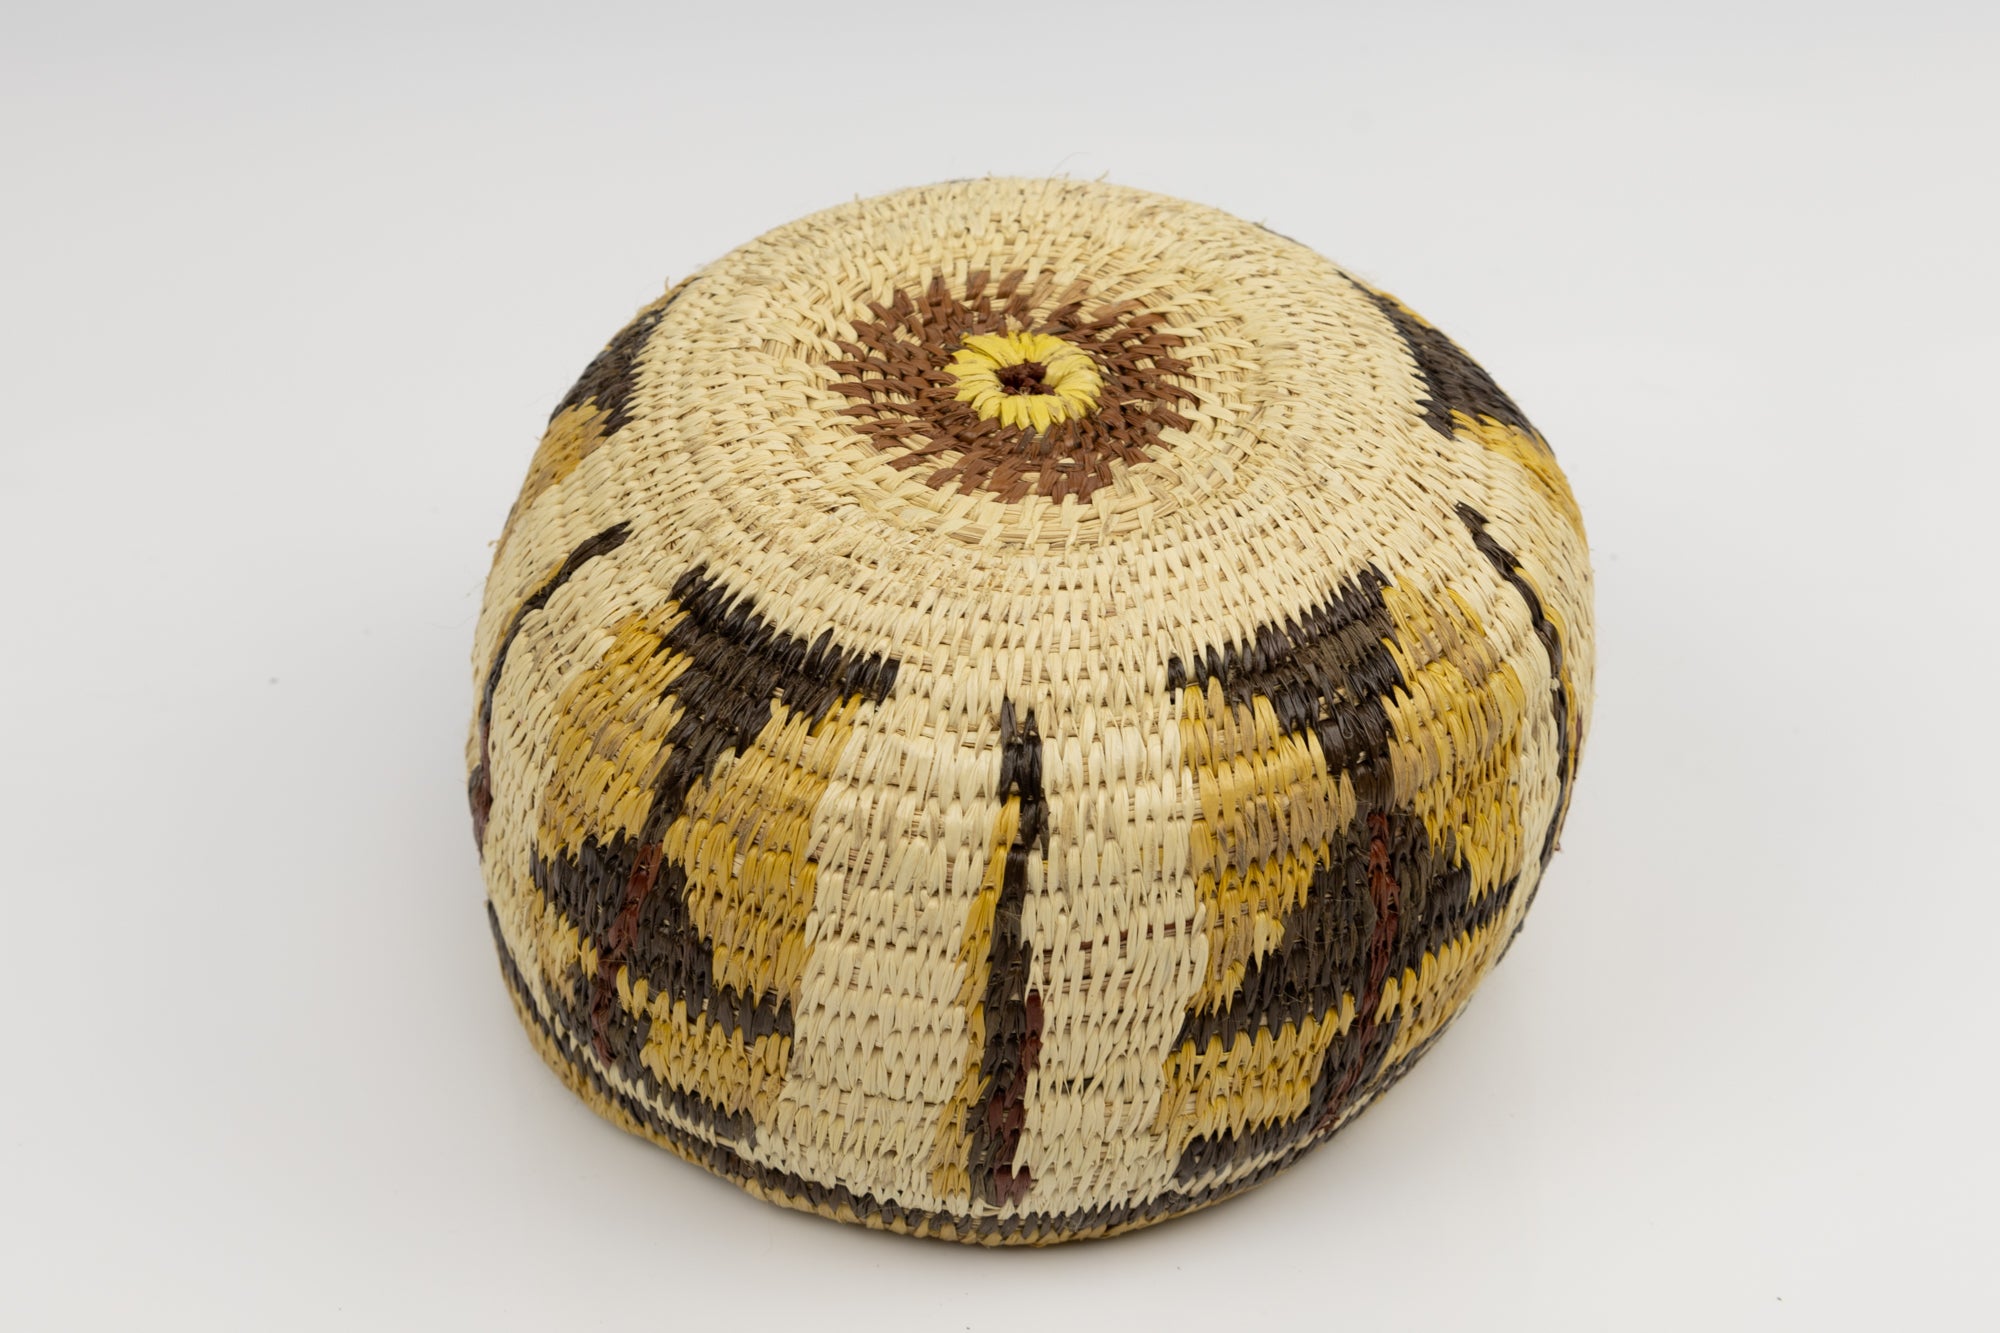 Hand Woven Vintage Hanging Basket Made By Indigenous Artisans